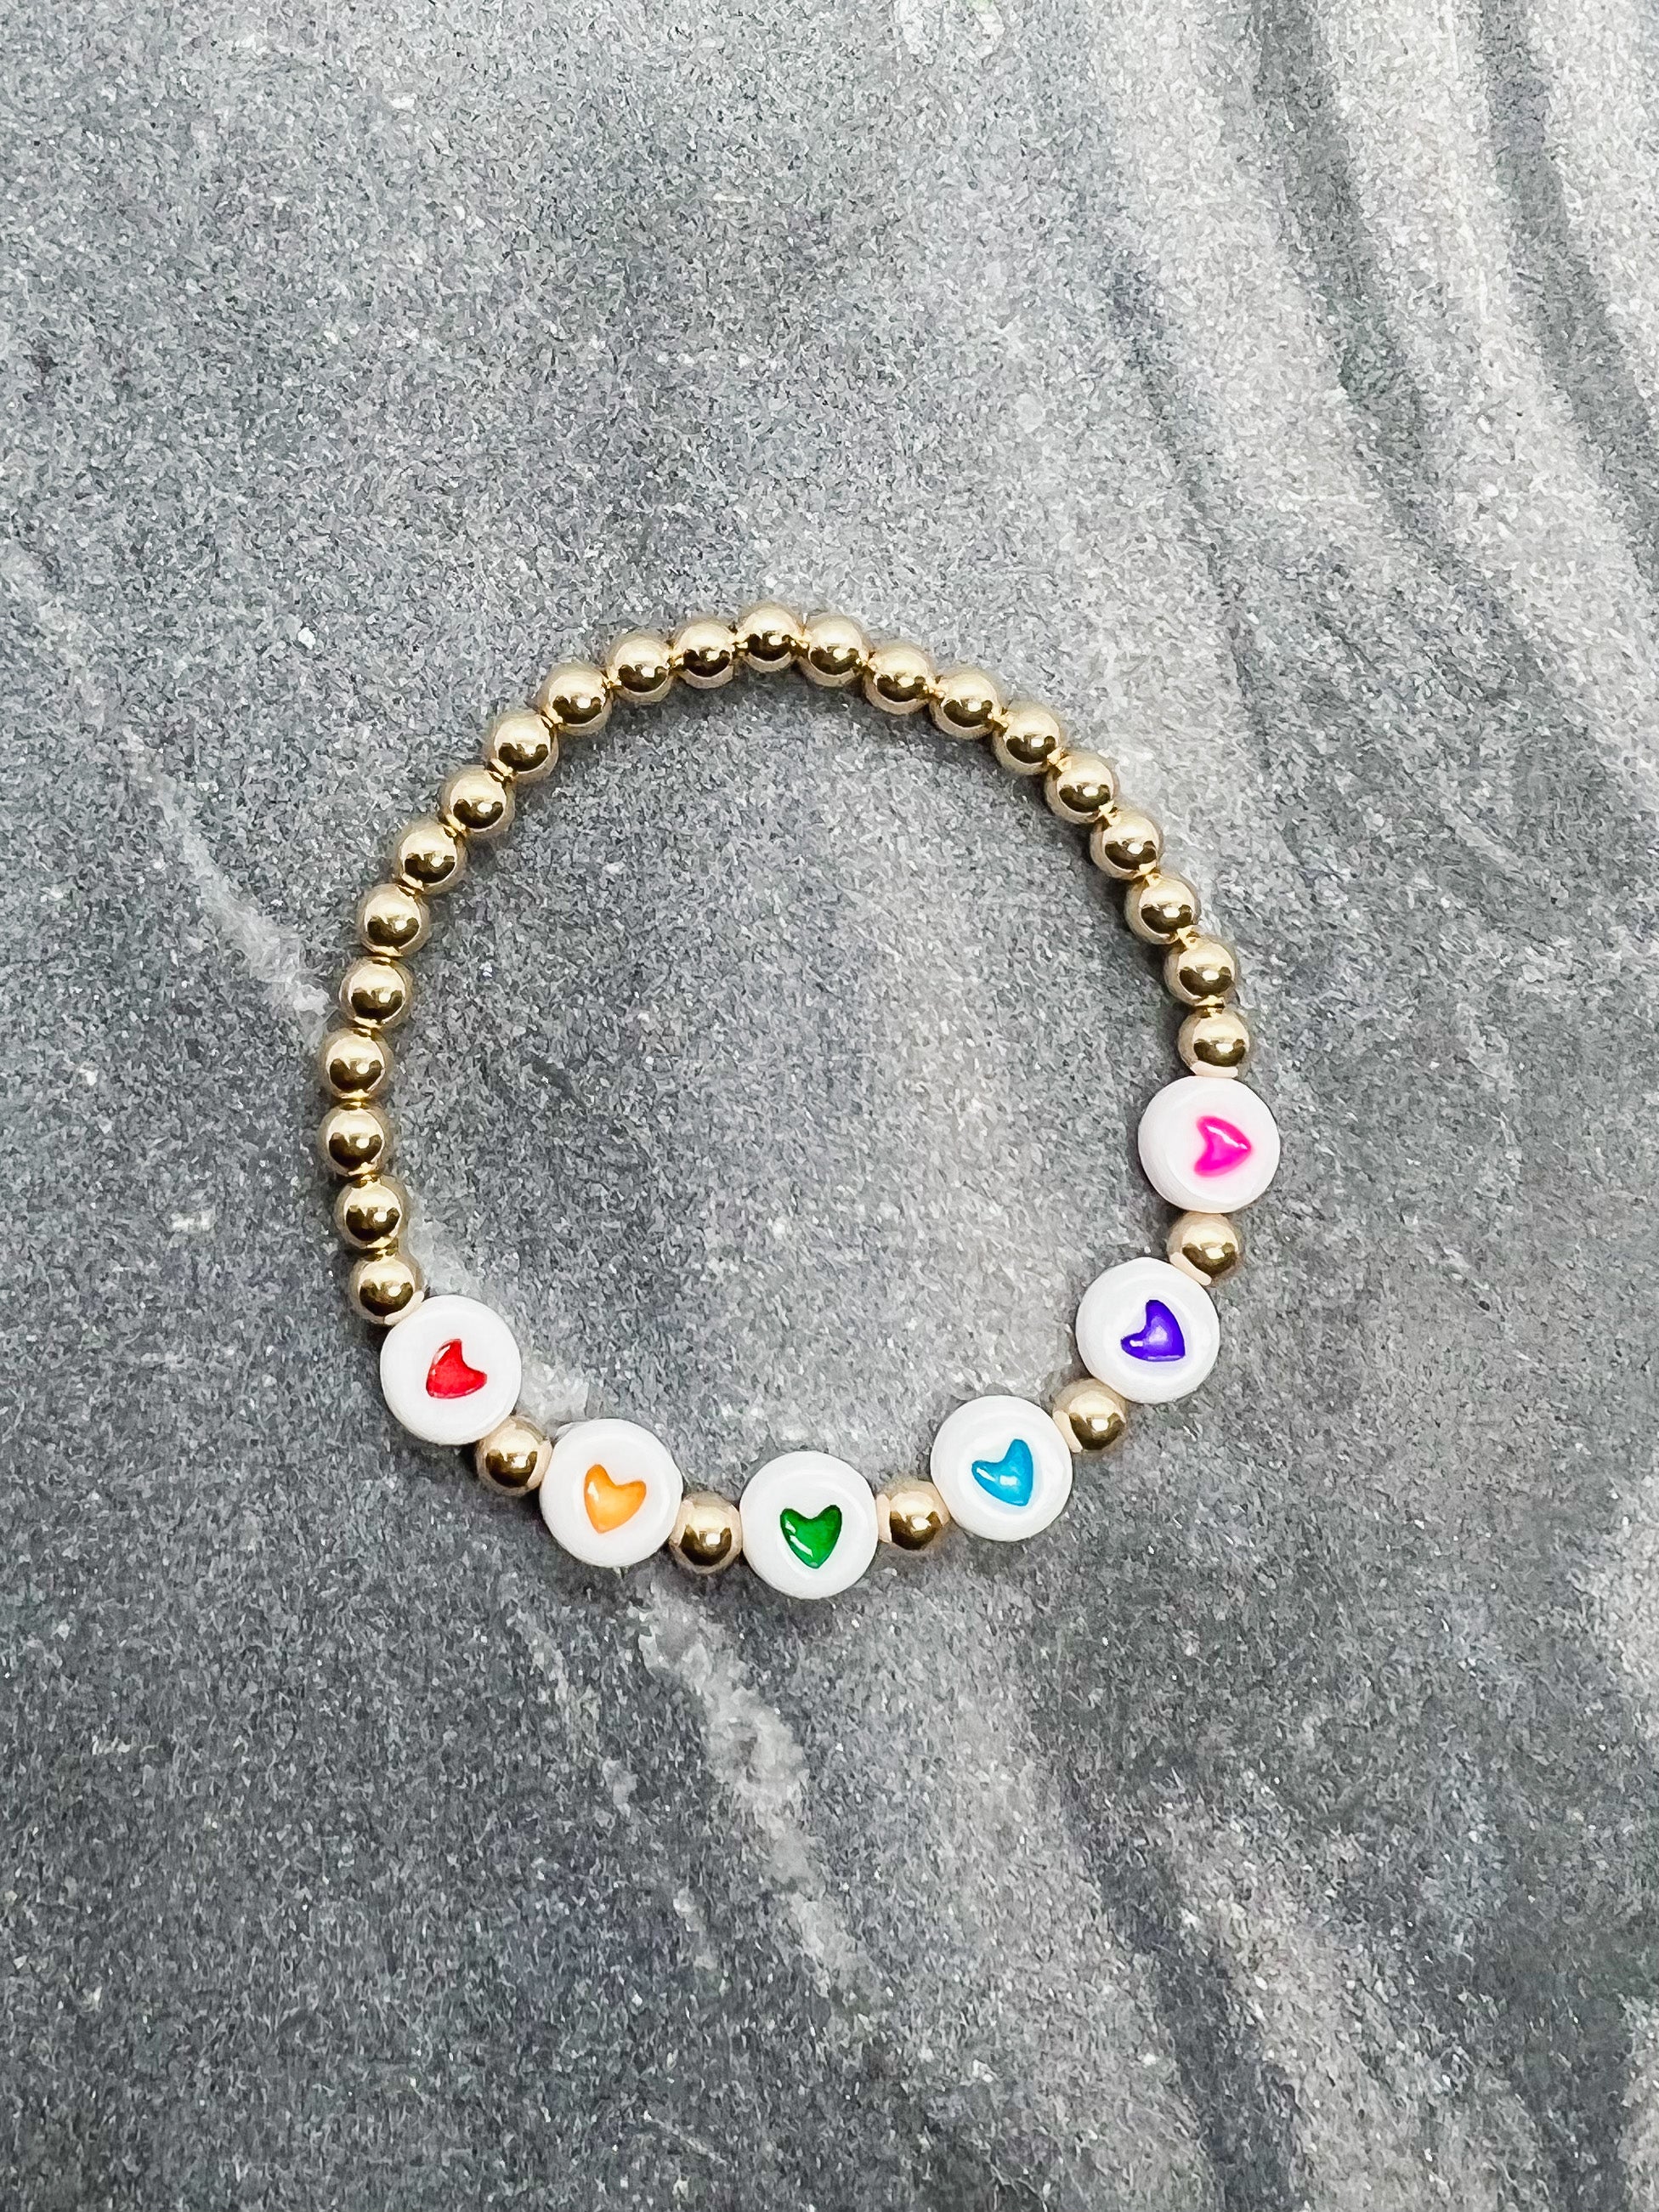 Kids 14K Gold Filled Bracelet with Rainbow Heart Beads (4mm)